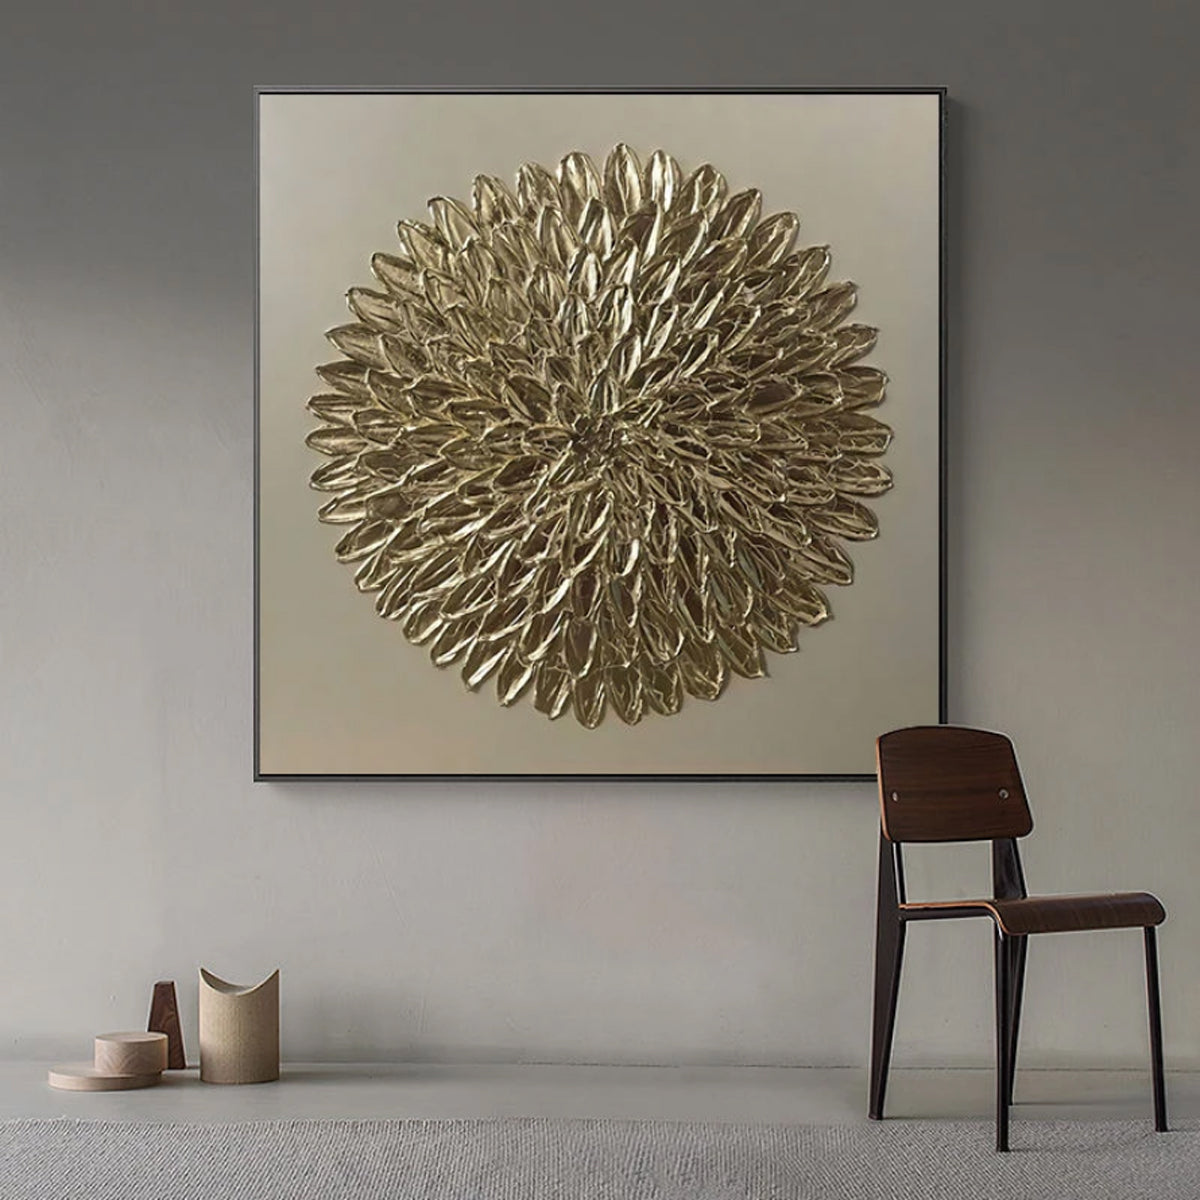 – s abstract in print gold / 20 black canvas / TPFLiving motifs art Traumpreisfabrik 5 on